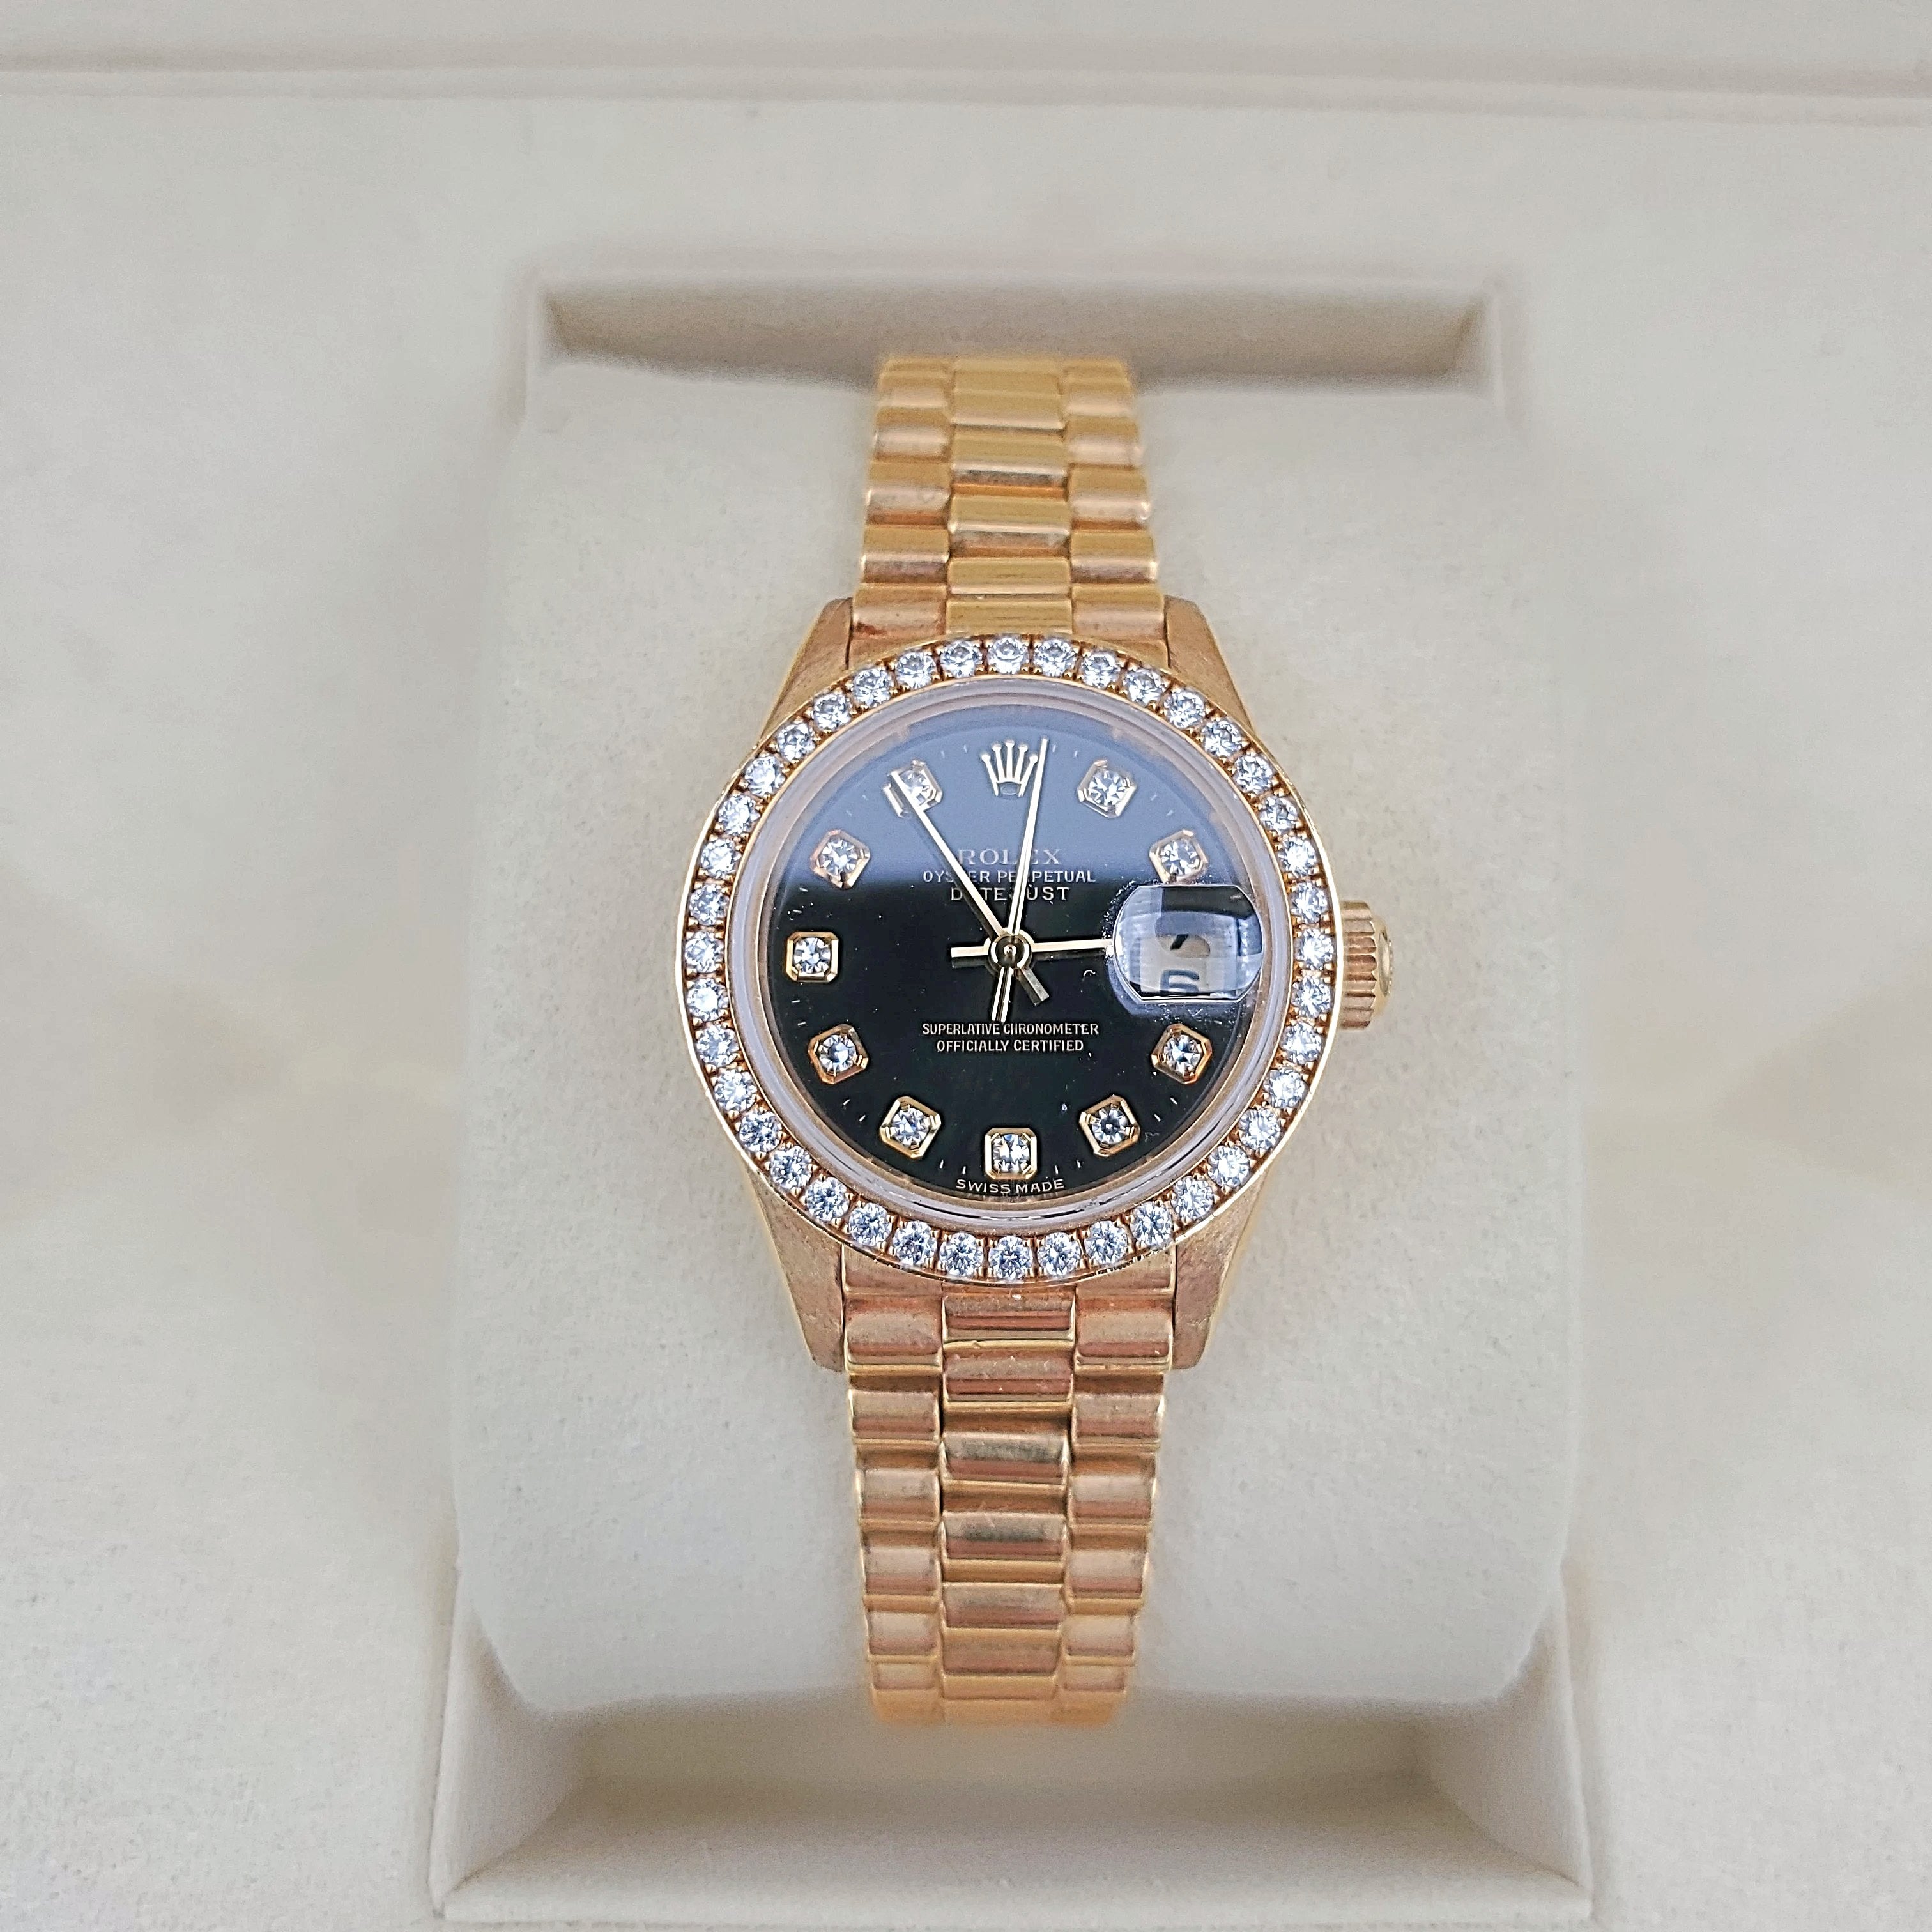 Ladies Rolex 26mm Presidential 18K Yellow Gold Watch with Black Diamond Dial and Diamond Bezel. (Pre-Owned)